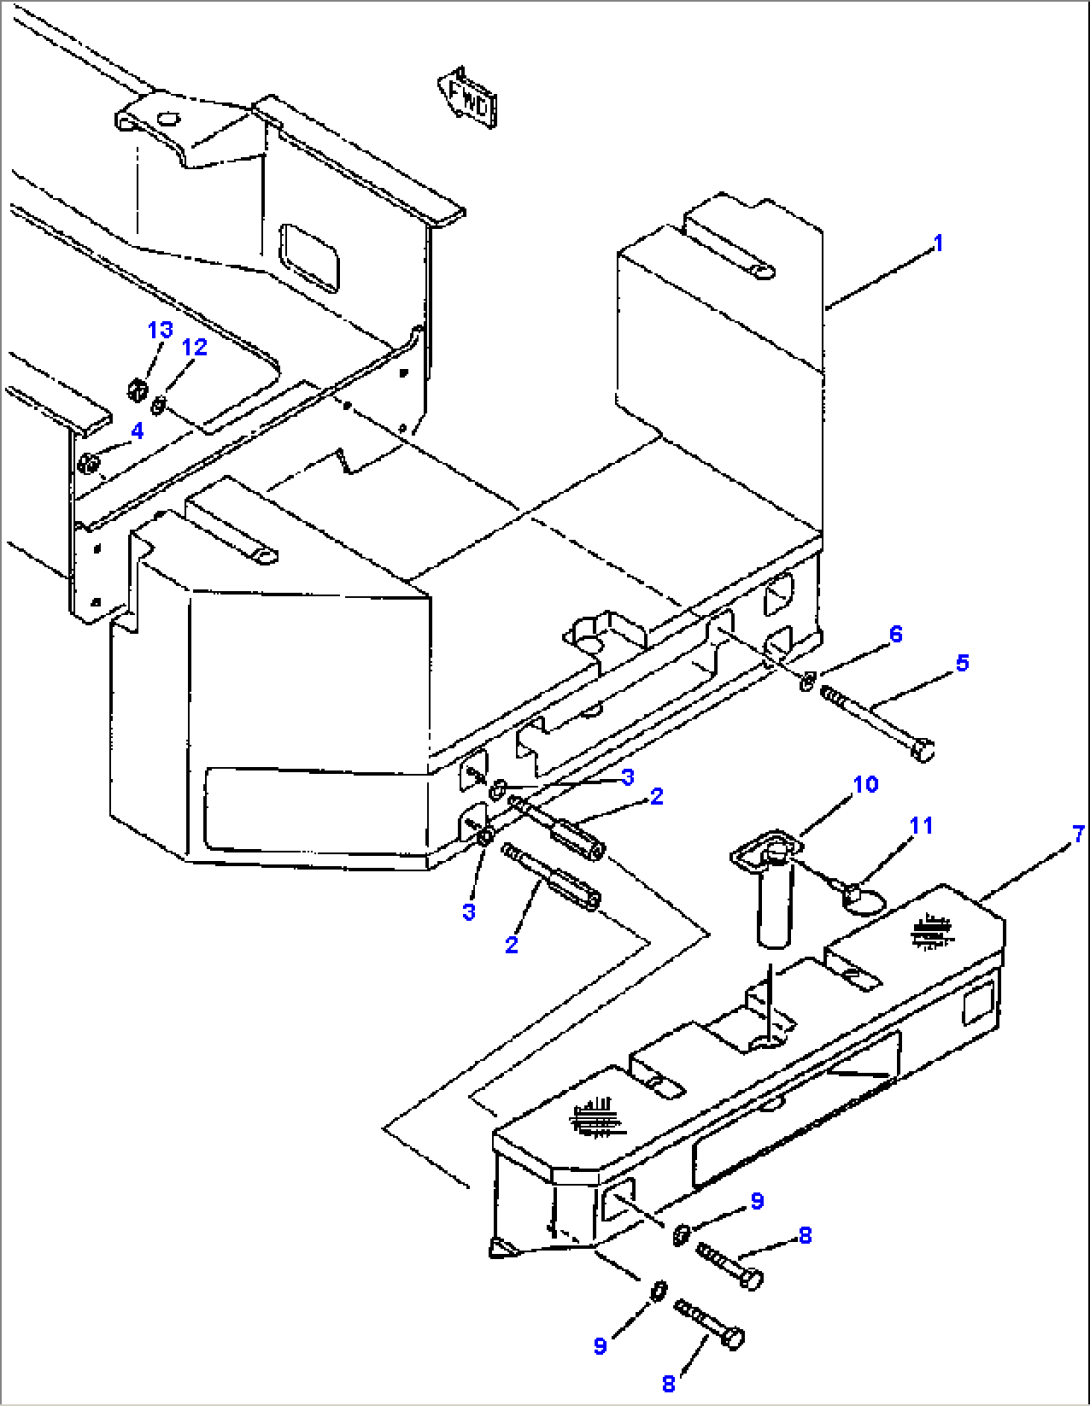 COUNTER WEIGHTS FOR LOAD AND CARRY APPLICATION